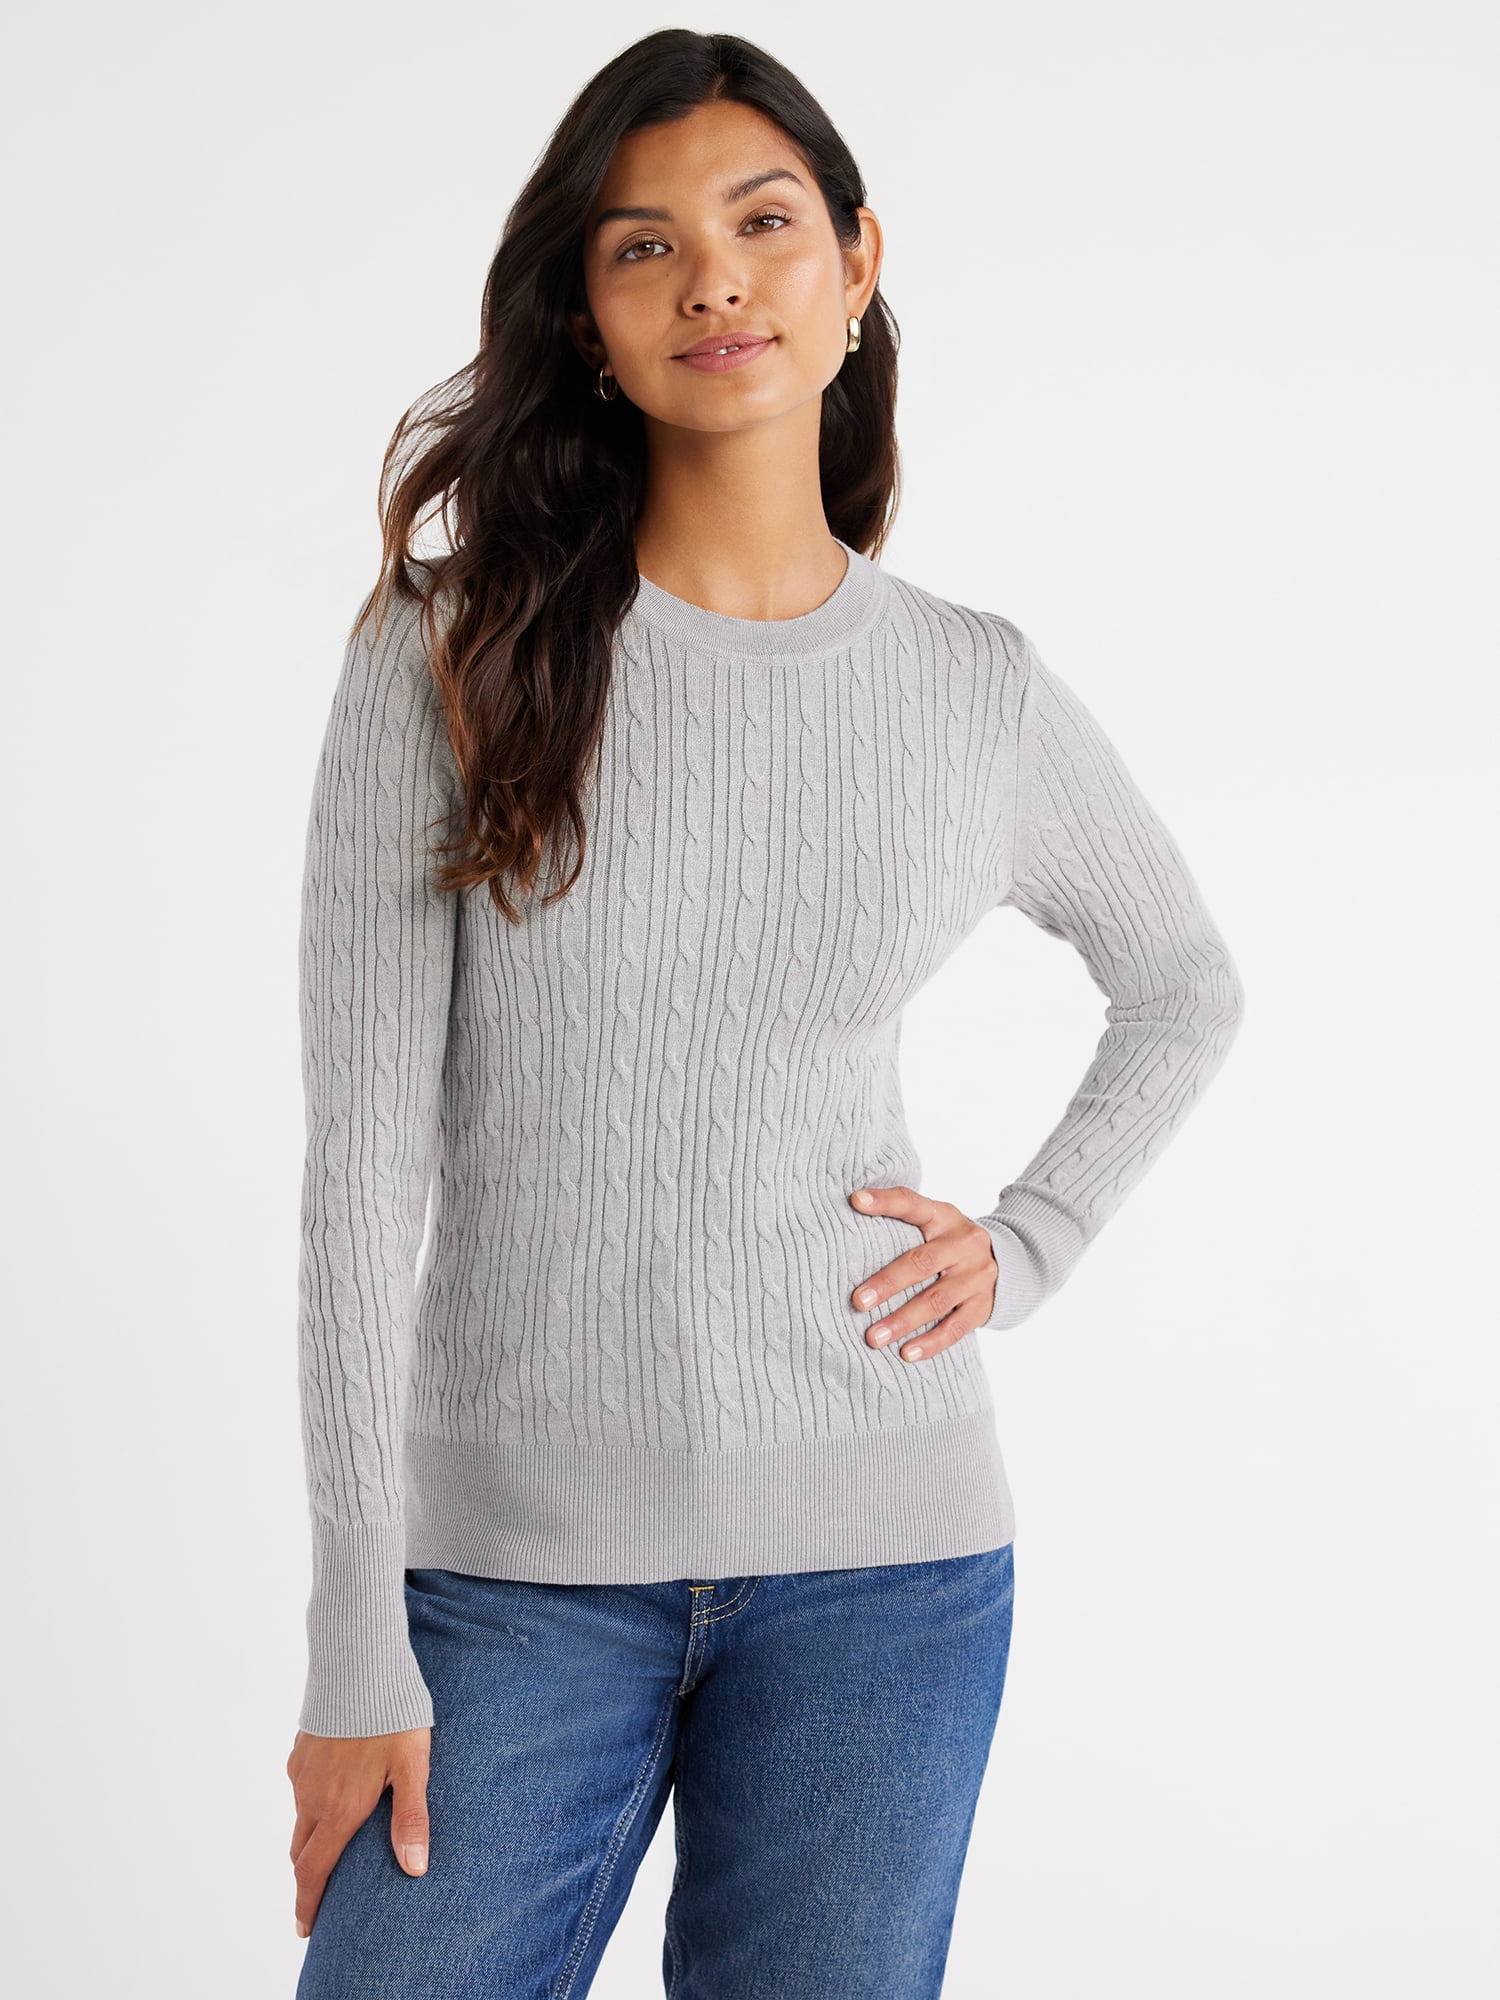 Free Assembly Women’s Cable Knit Crewneck Sweater, Midweight, Sizes XS ...